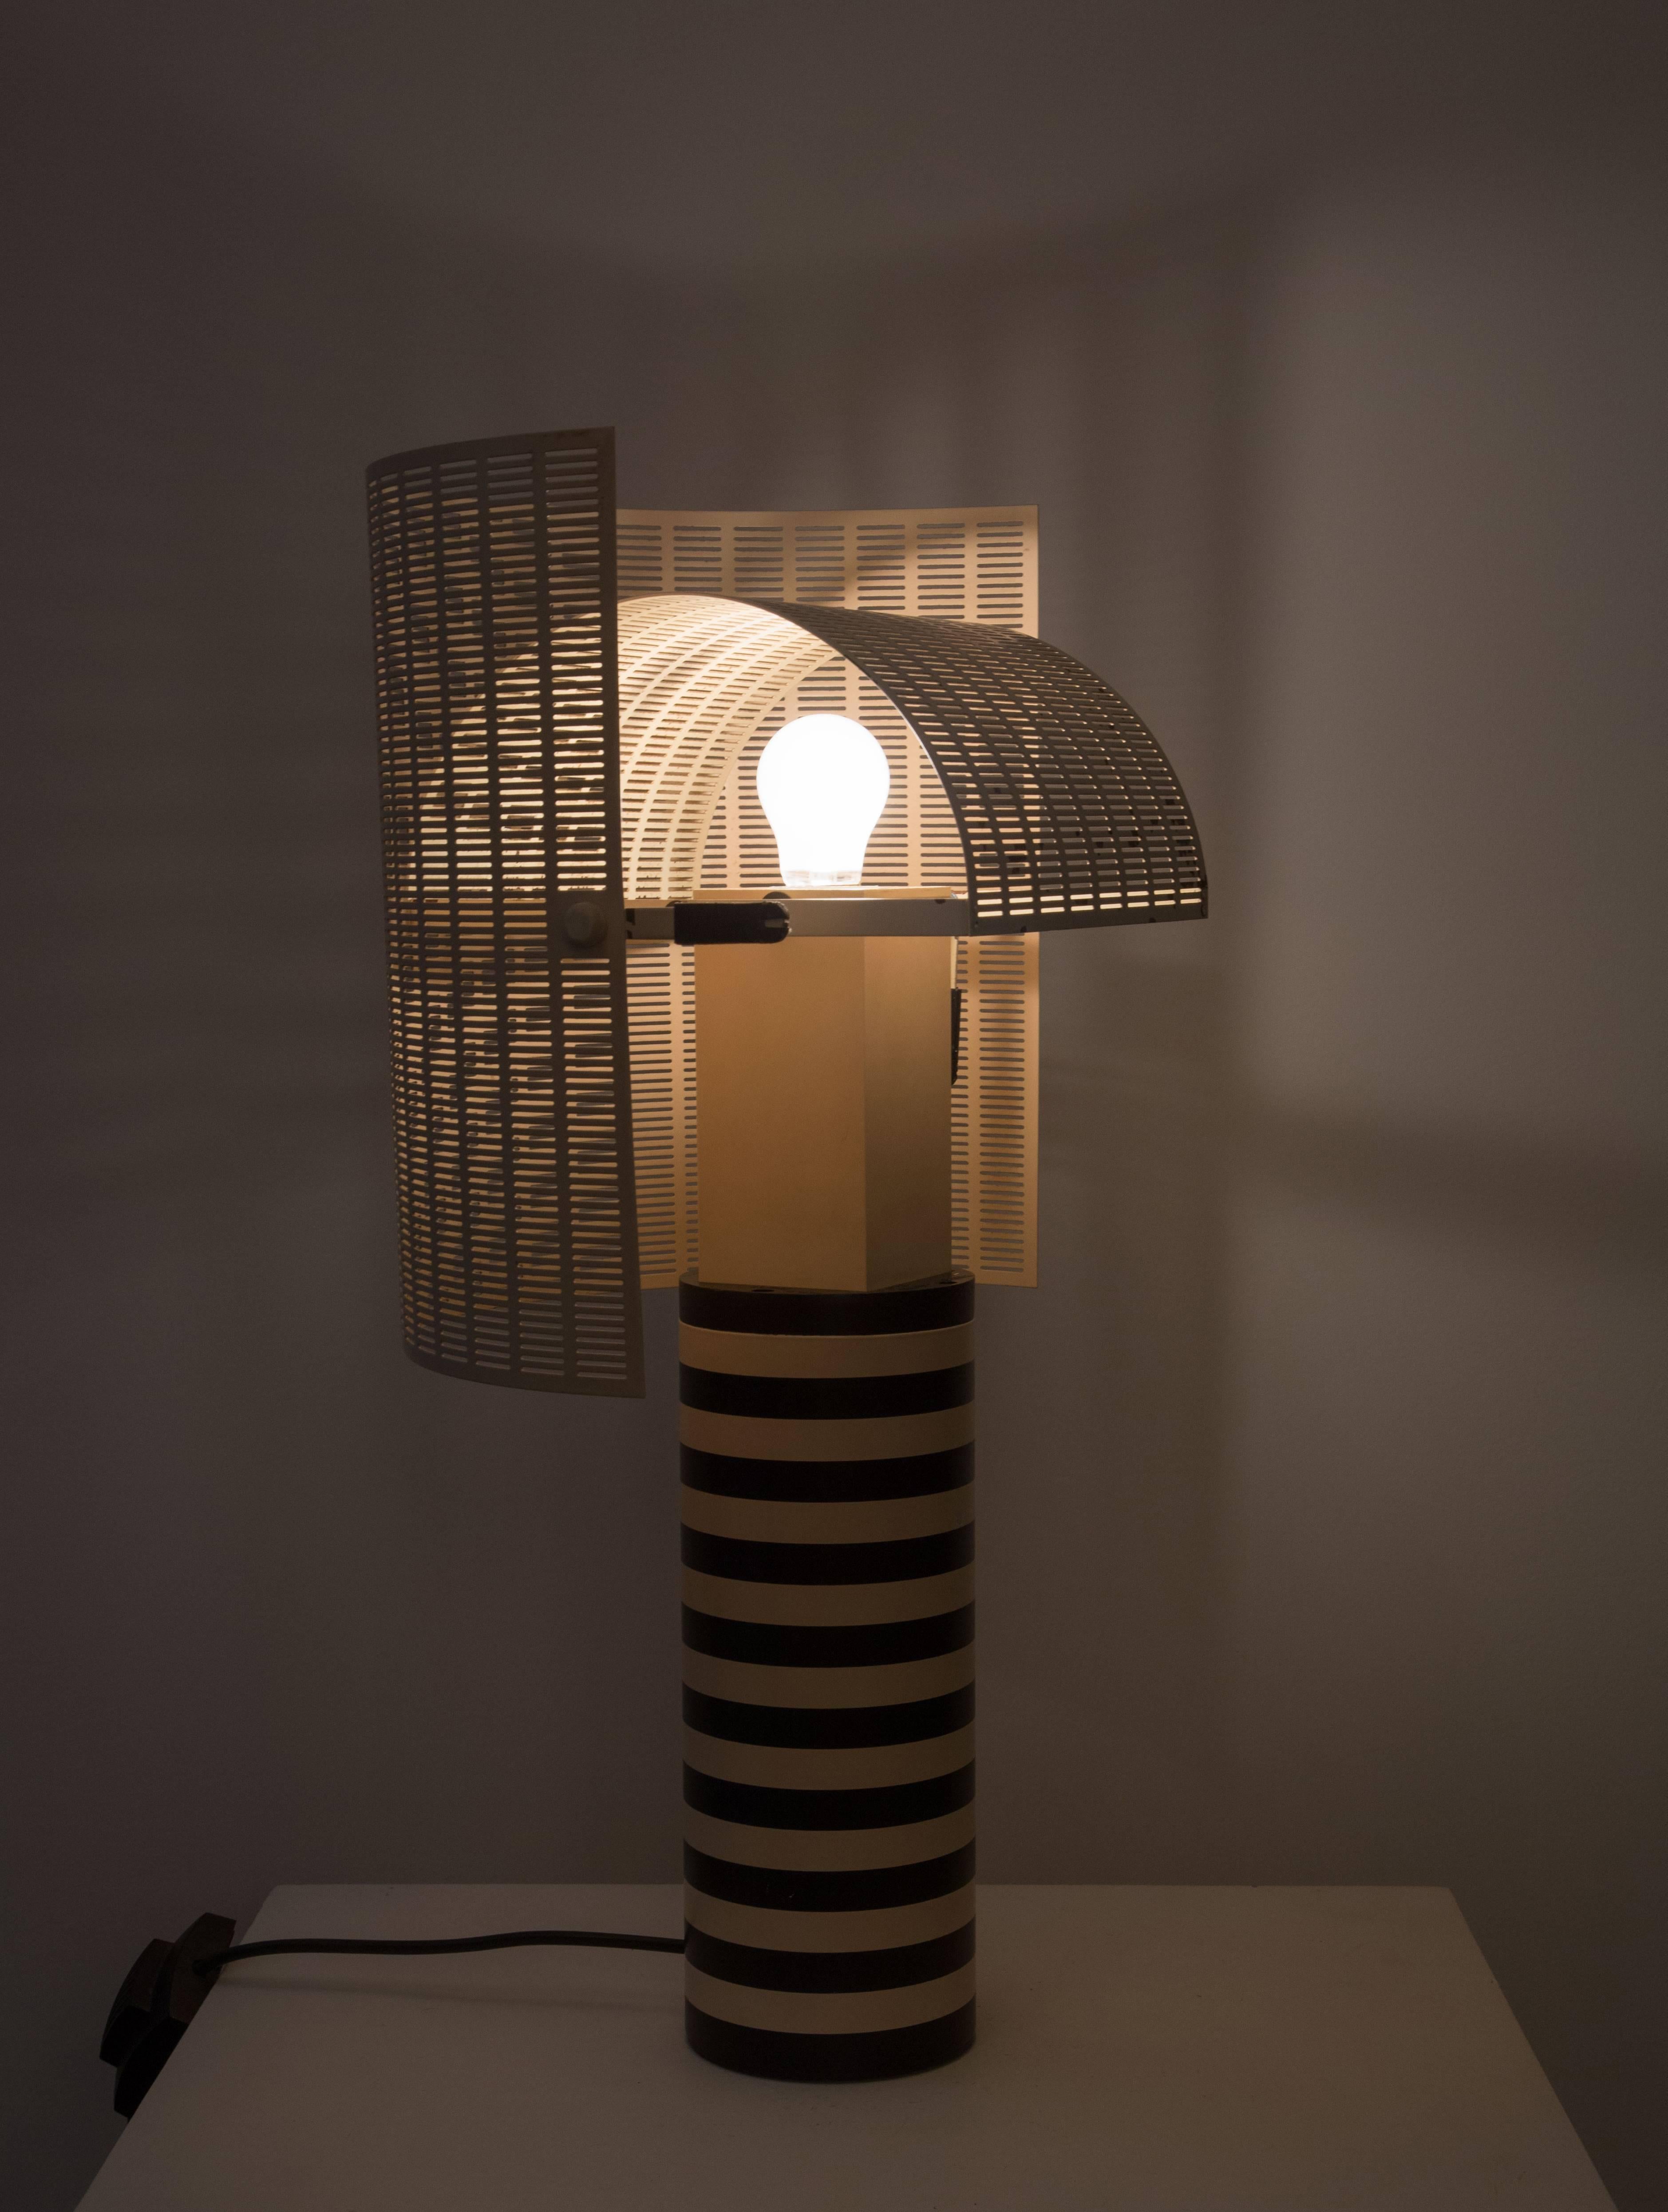 Model 'Shogun Tavolo' table lamp, designed by Mario Botta for Artemide in 1986 in Italy. Both elements of the shade are made from perforated metal diffusers that can be turned independently to shield the light source. Made of enameled aluminum,